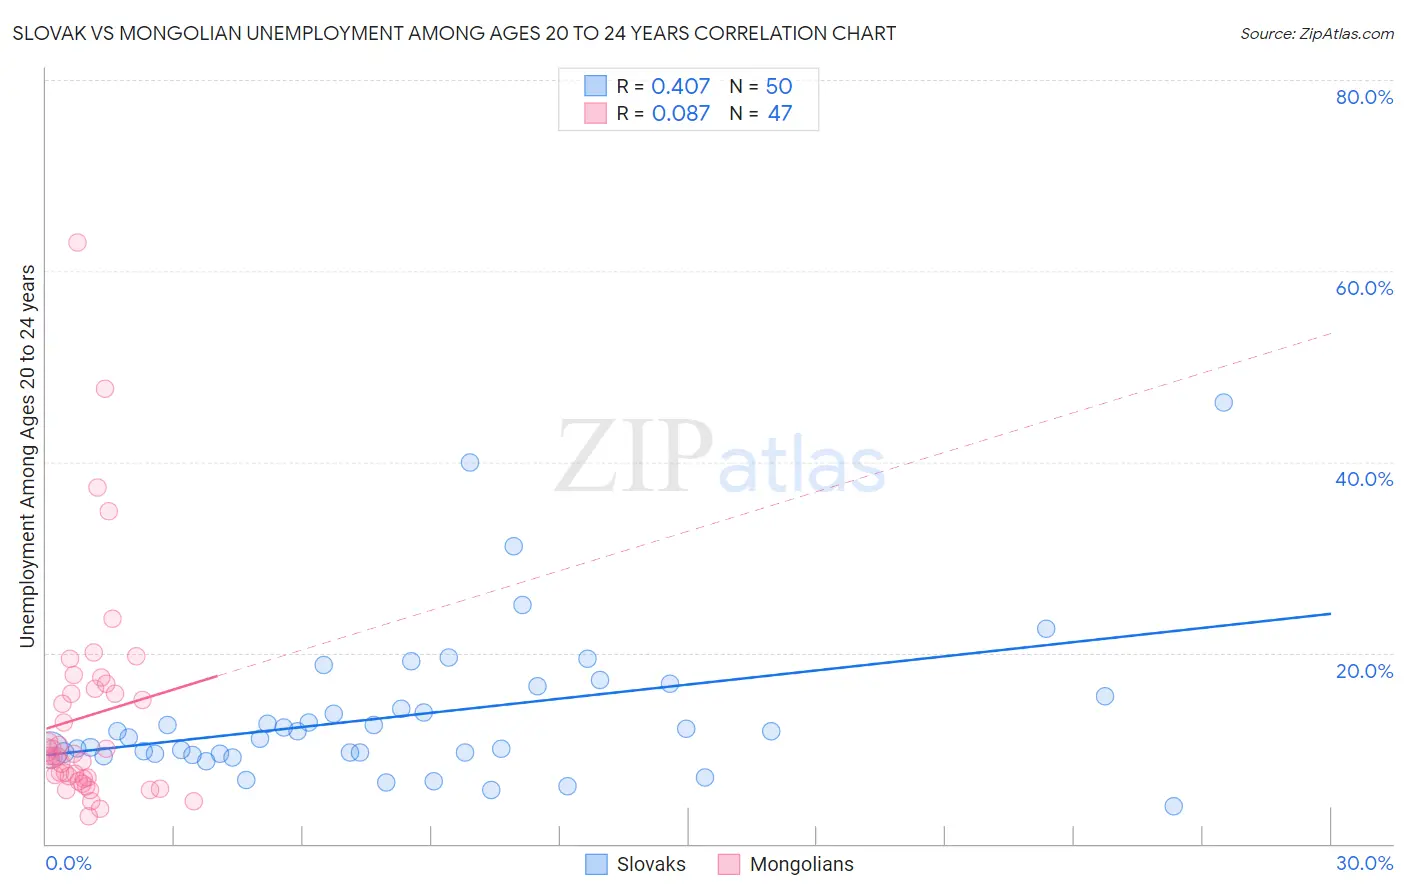 Slovak vs Mongolian Unemployment Among Ages 20 to 24 years